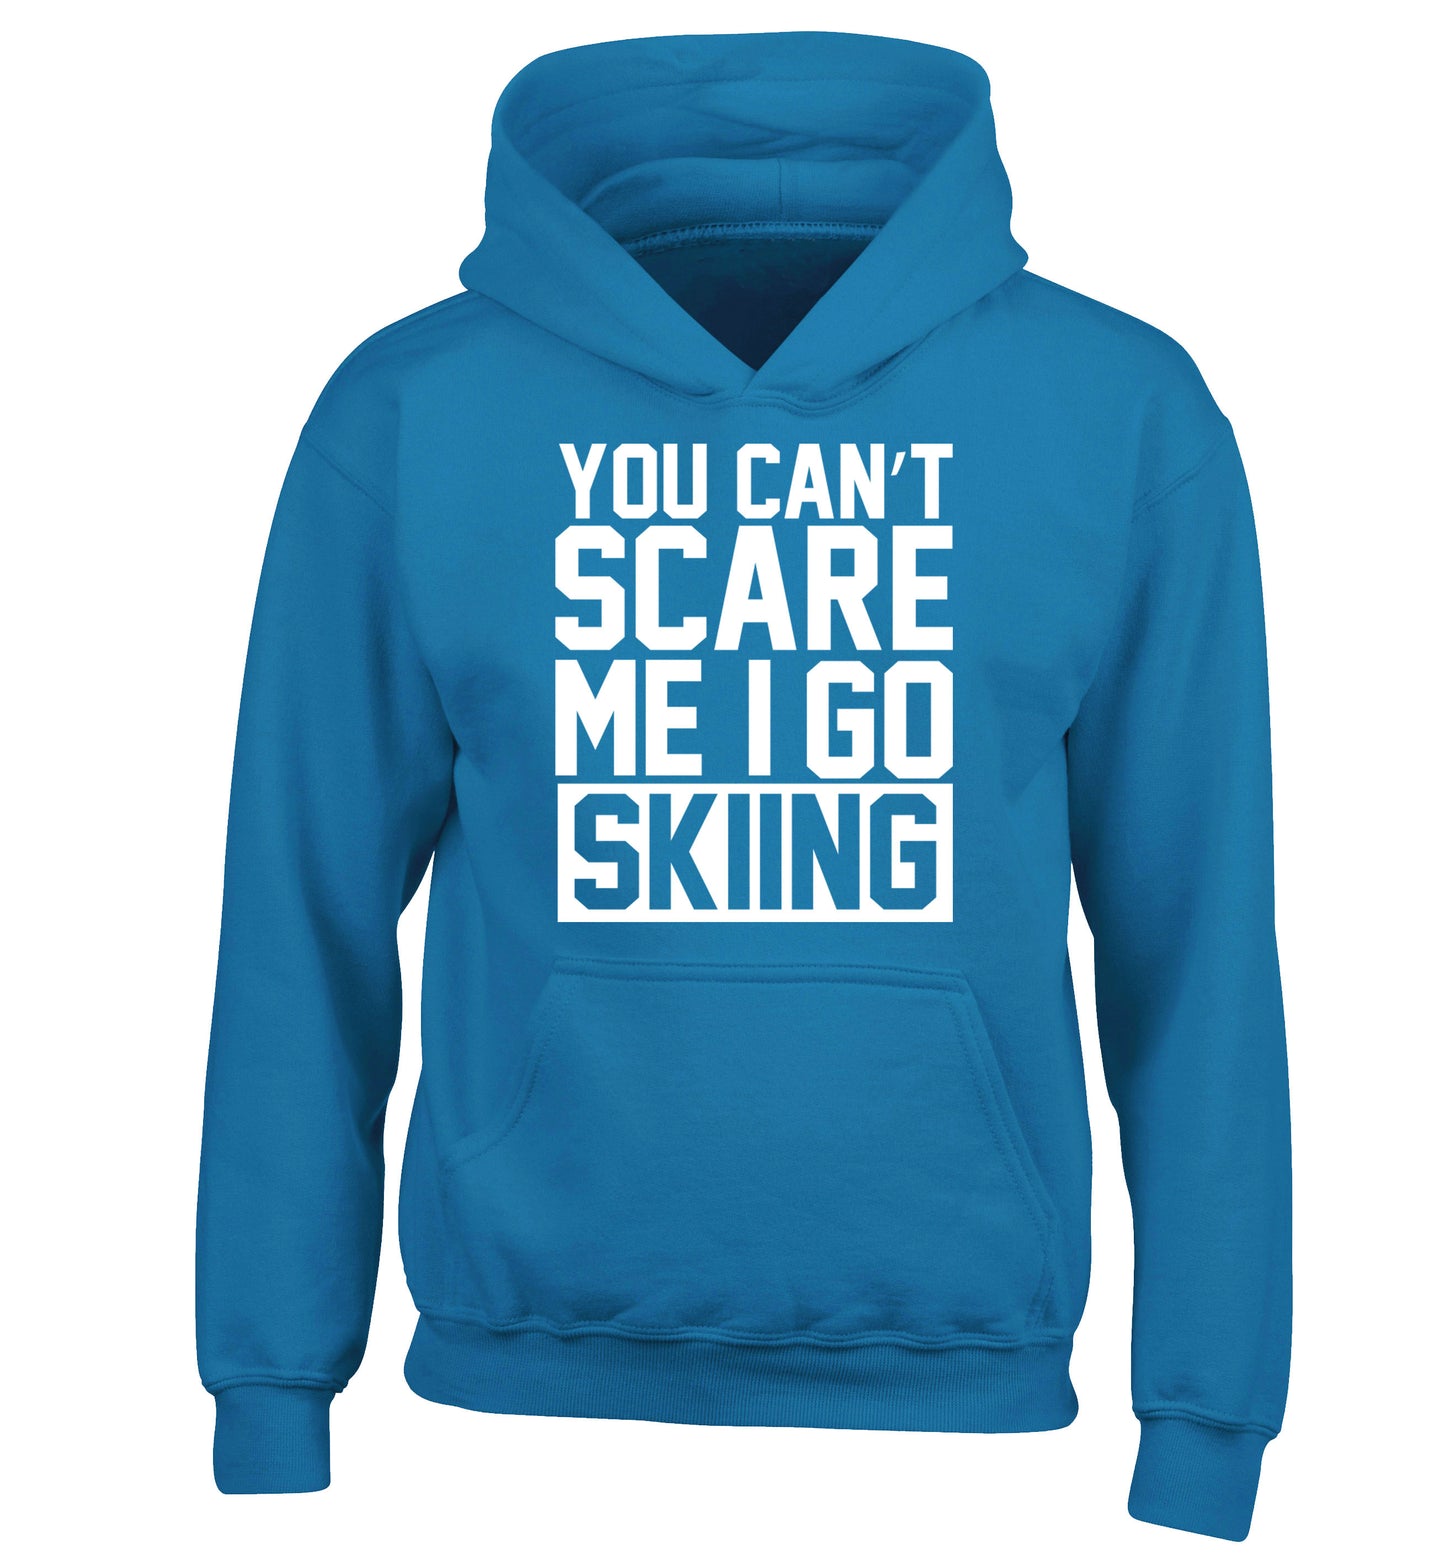 You can't scare me I go skiing children's blue hoodie 12-14 Years